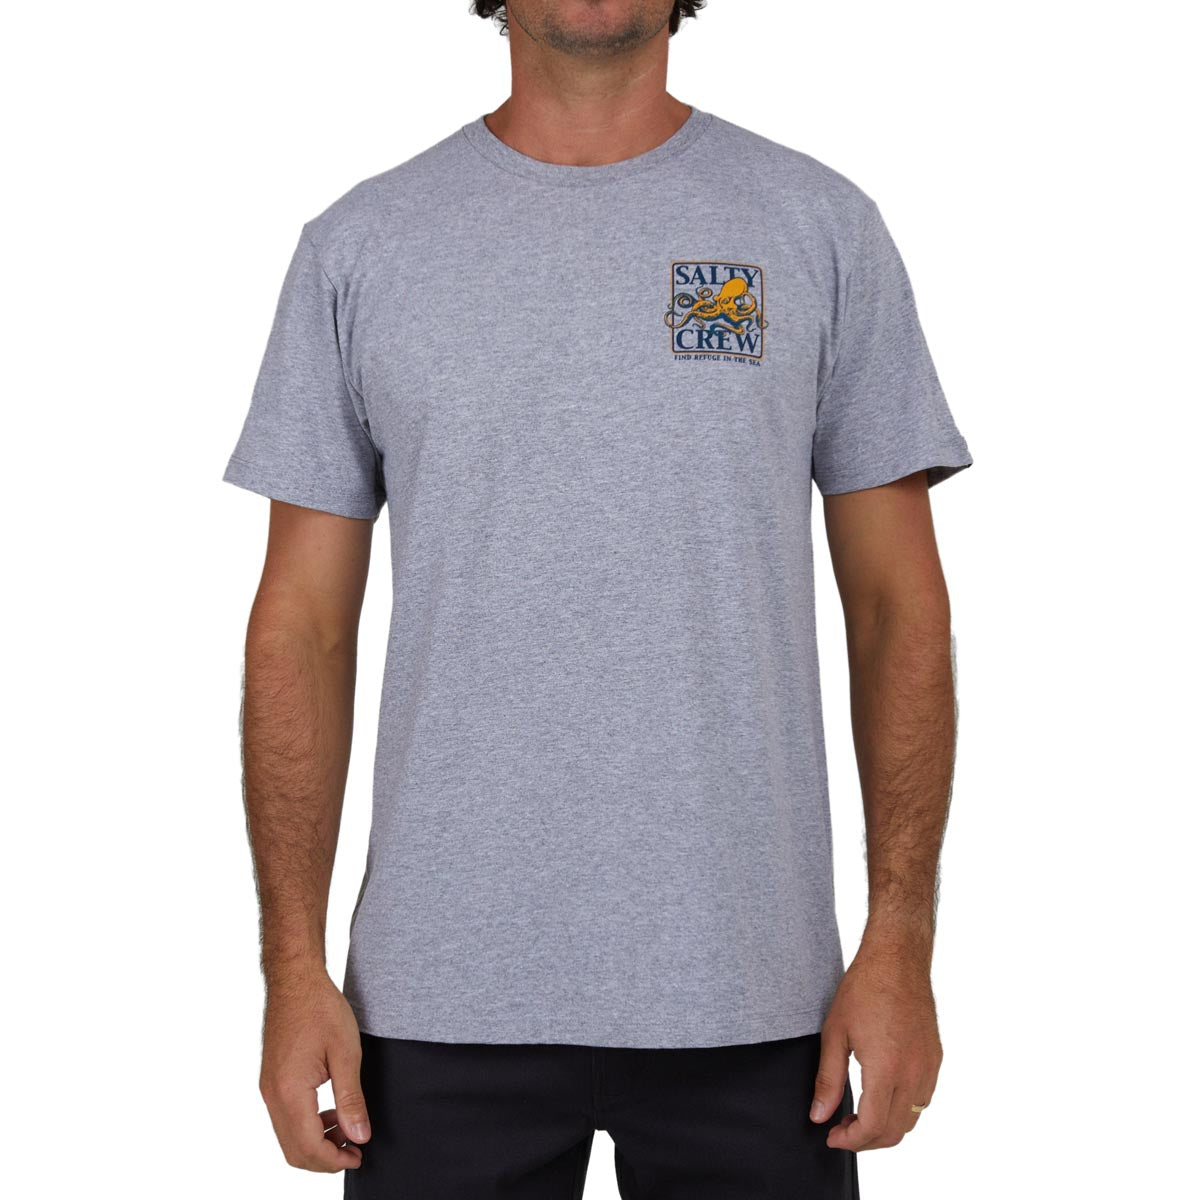 Salty Crew Ink Slinger Classic T-Shirt - Athletic Heather image 3